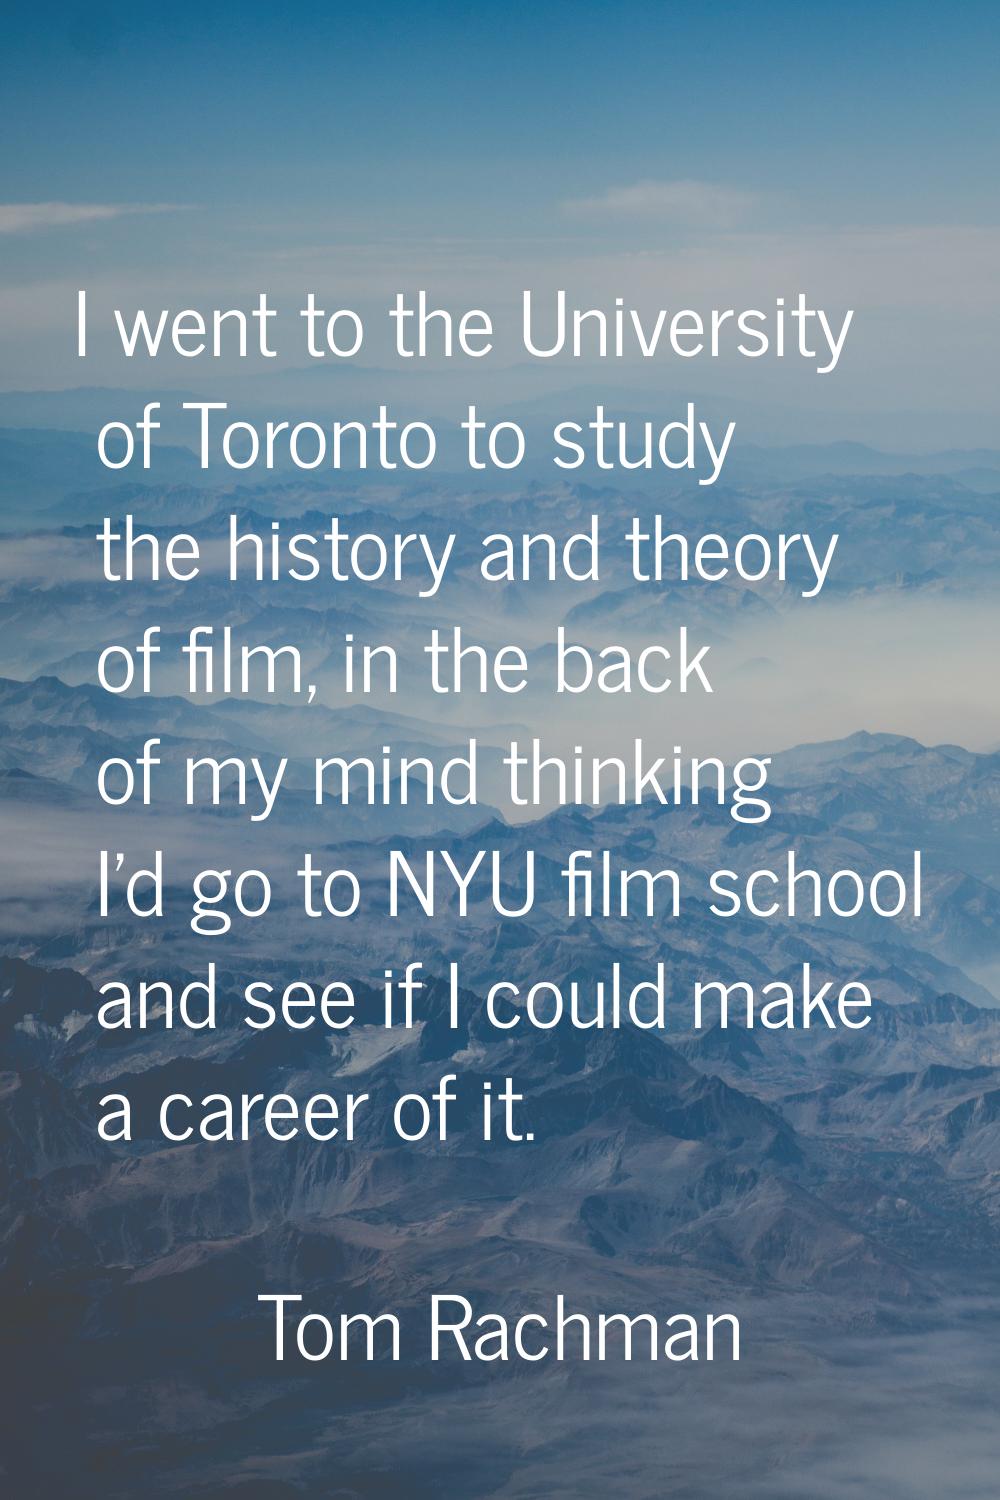 I went to the University of Toronto to study the history and theory of film, in the back of my mind